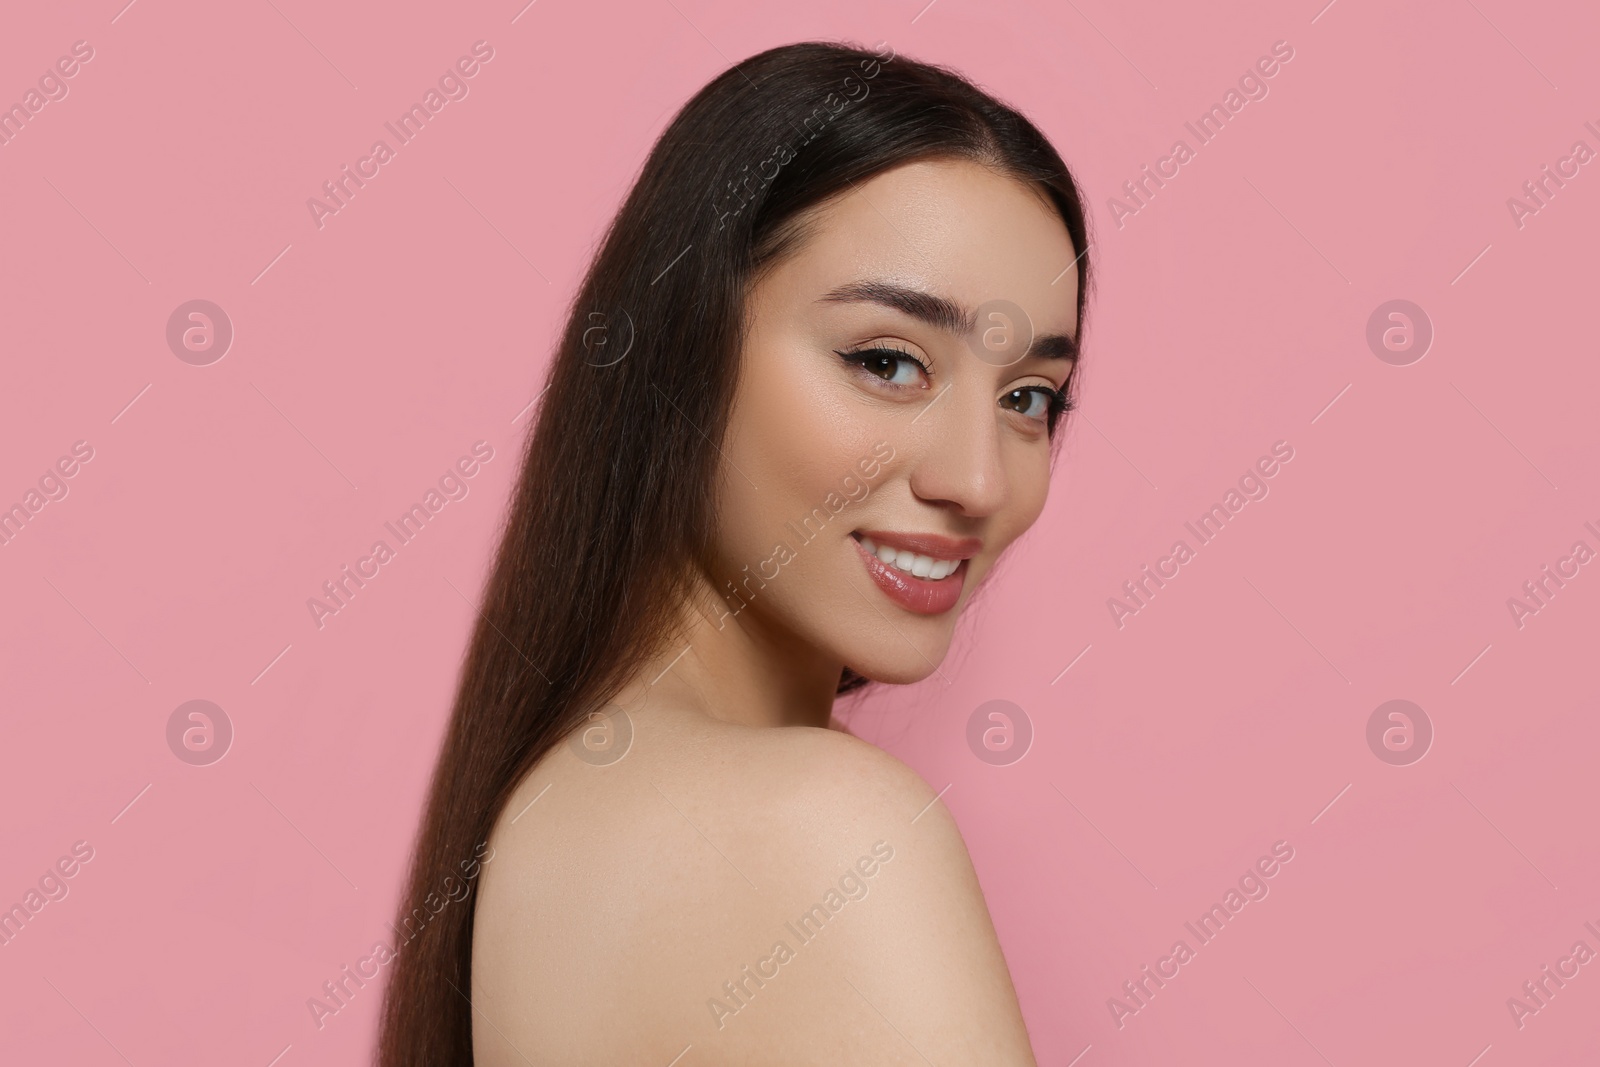 Photo of Portrait of beautiful young woman with elegant makeup on pink background